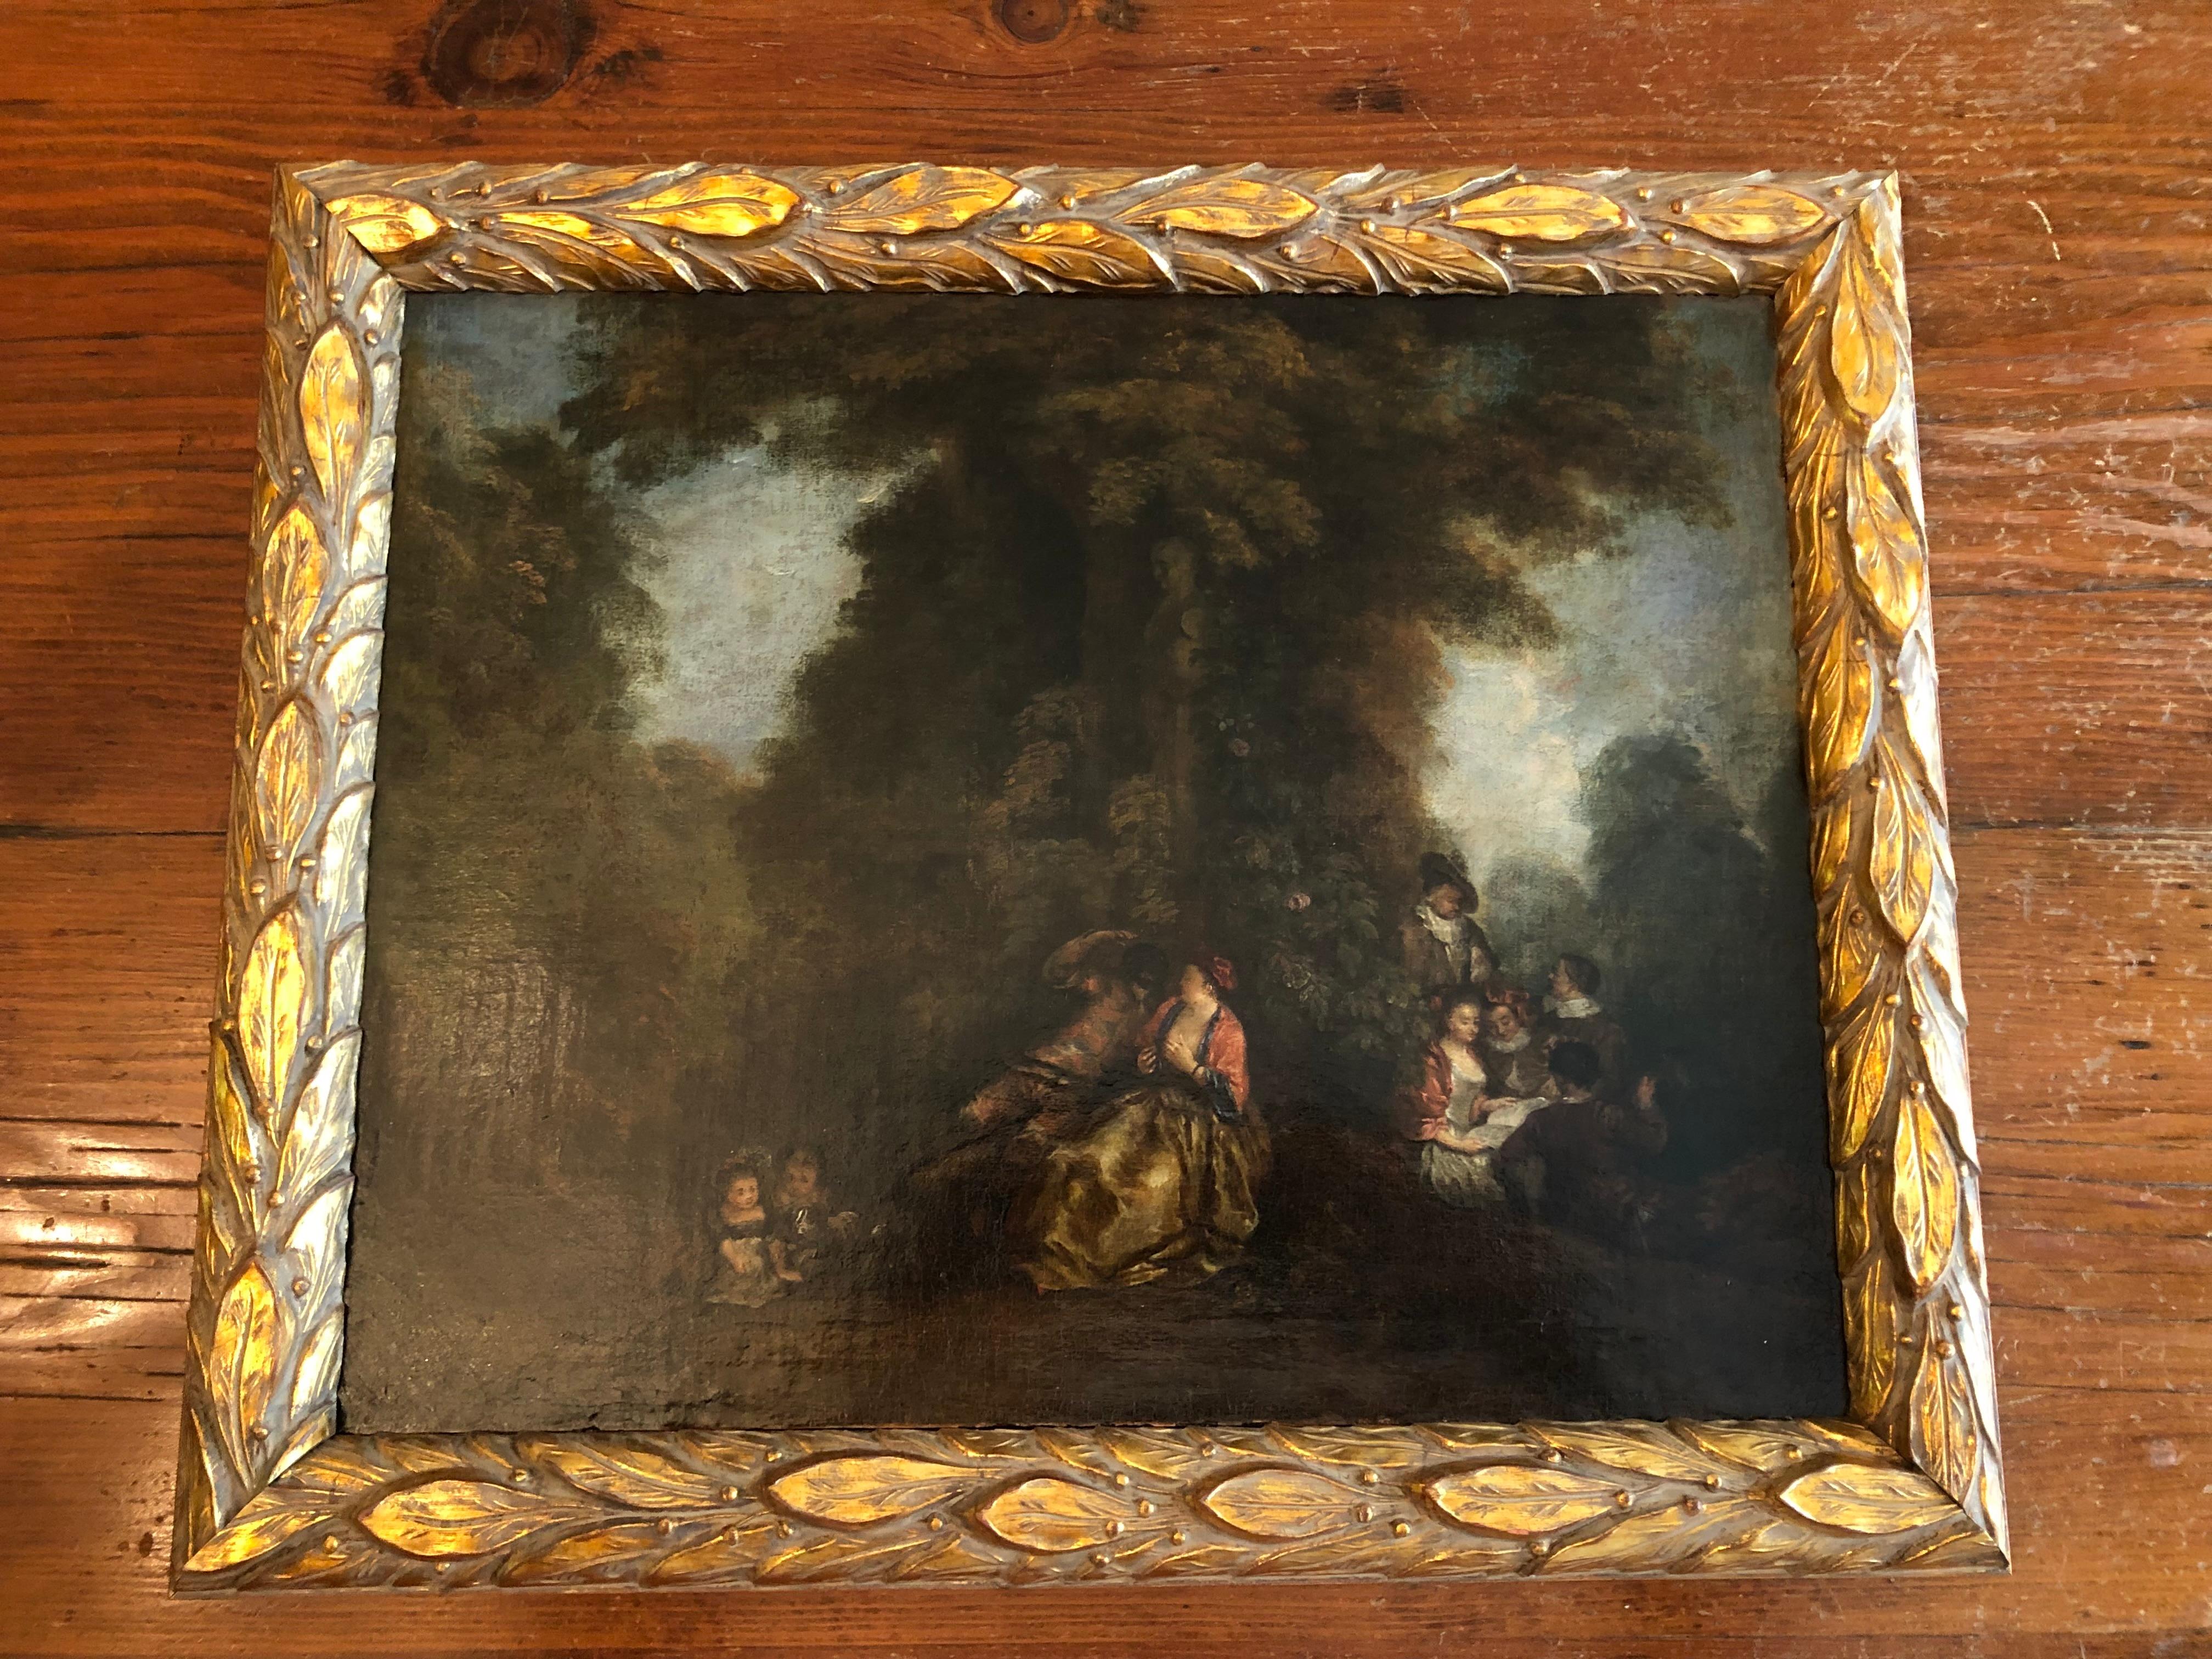 A beautiful 18th Century oil on canvas, depicting a garden scene typical of the period, also known as a 